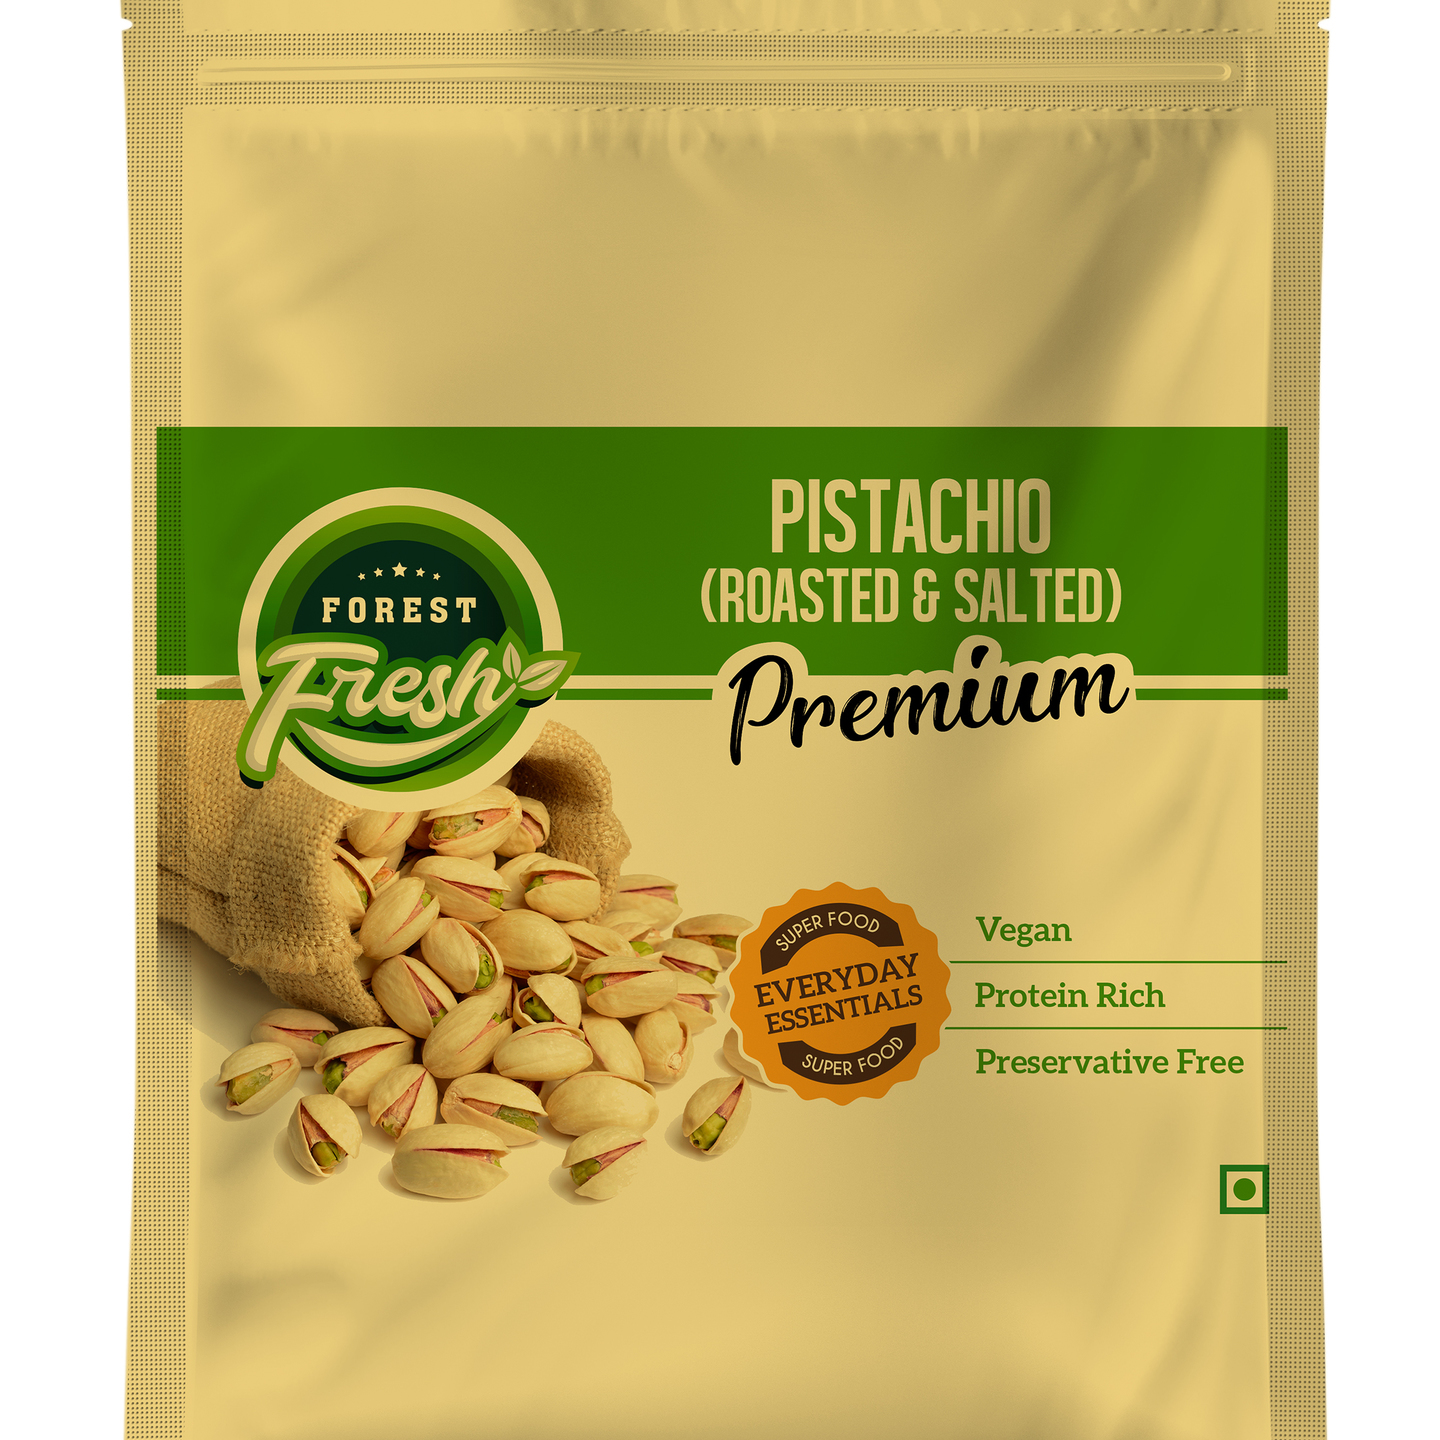 Forest Fresh 100 Natural - Premium Roasted & Salted Irani Pistachio - 750g - Everyday Essential Superfood